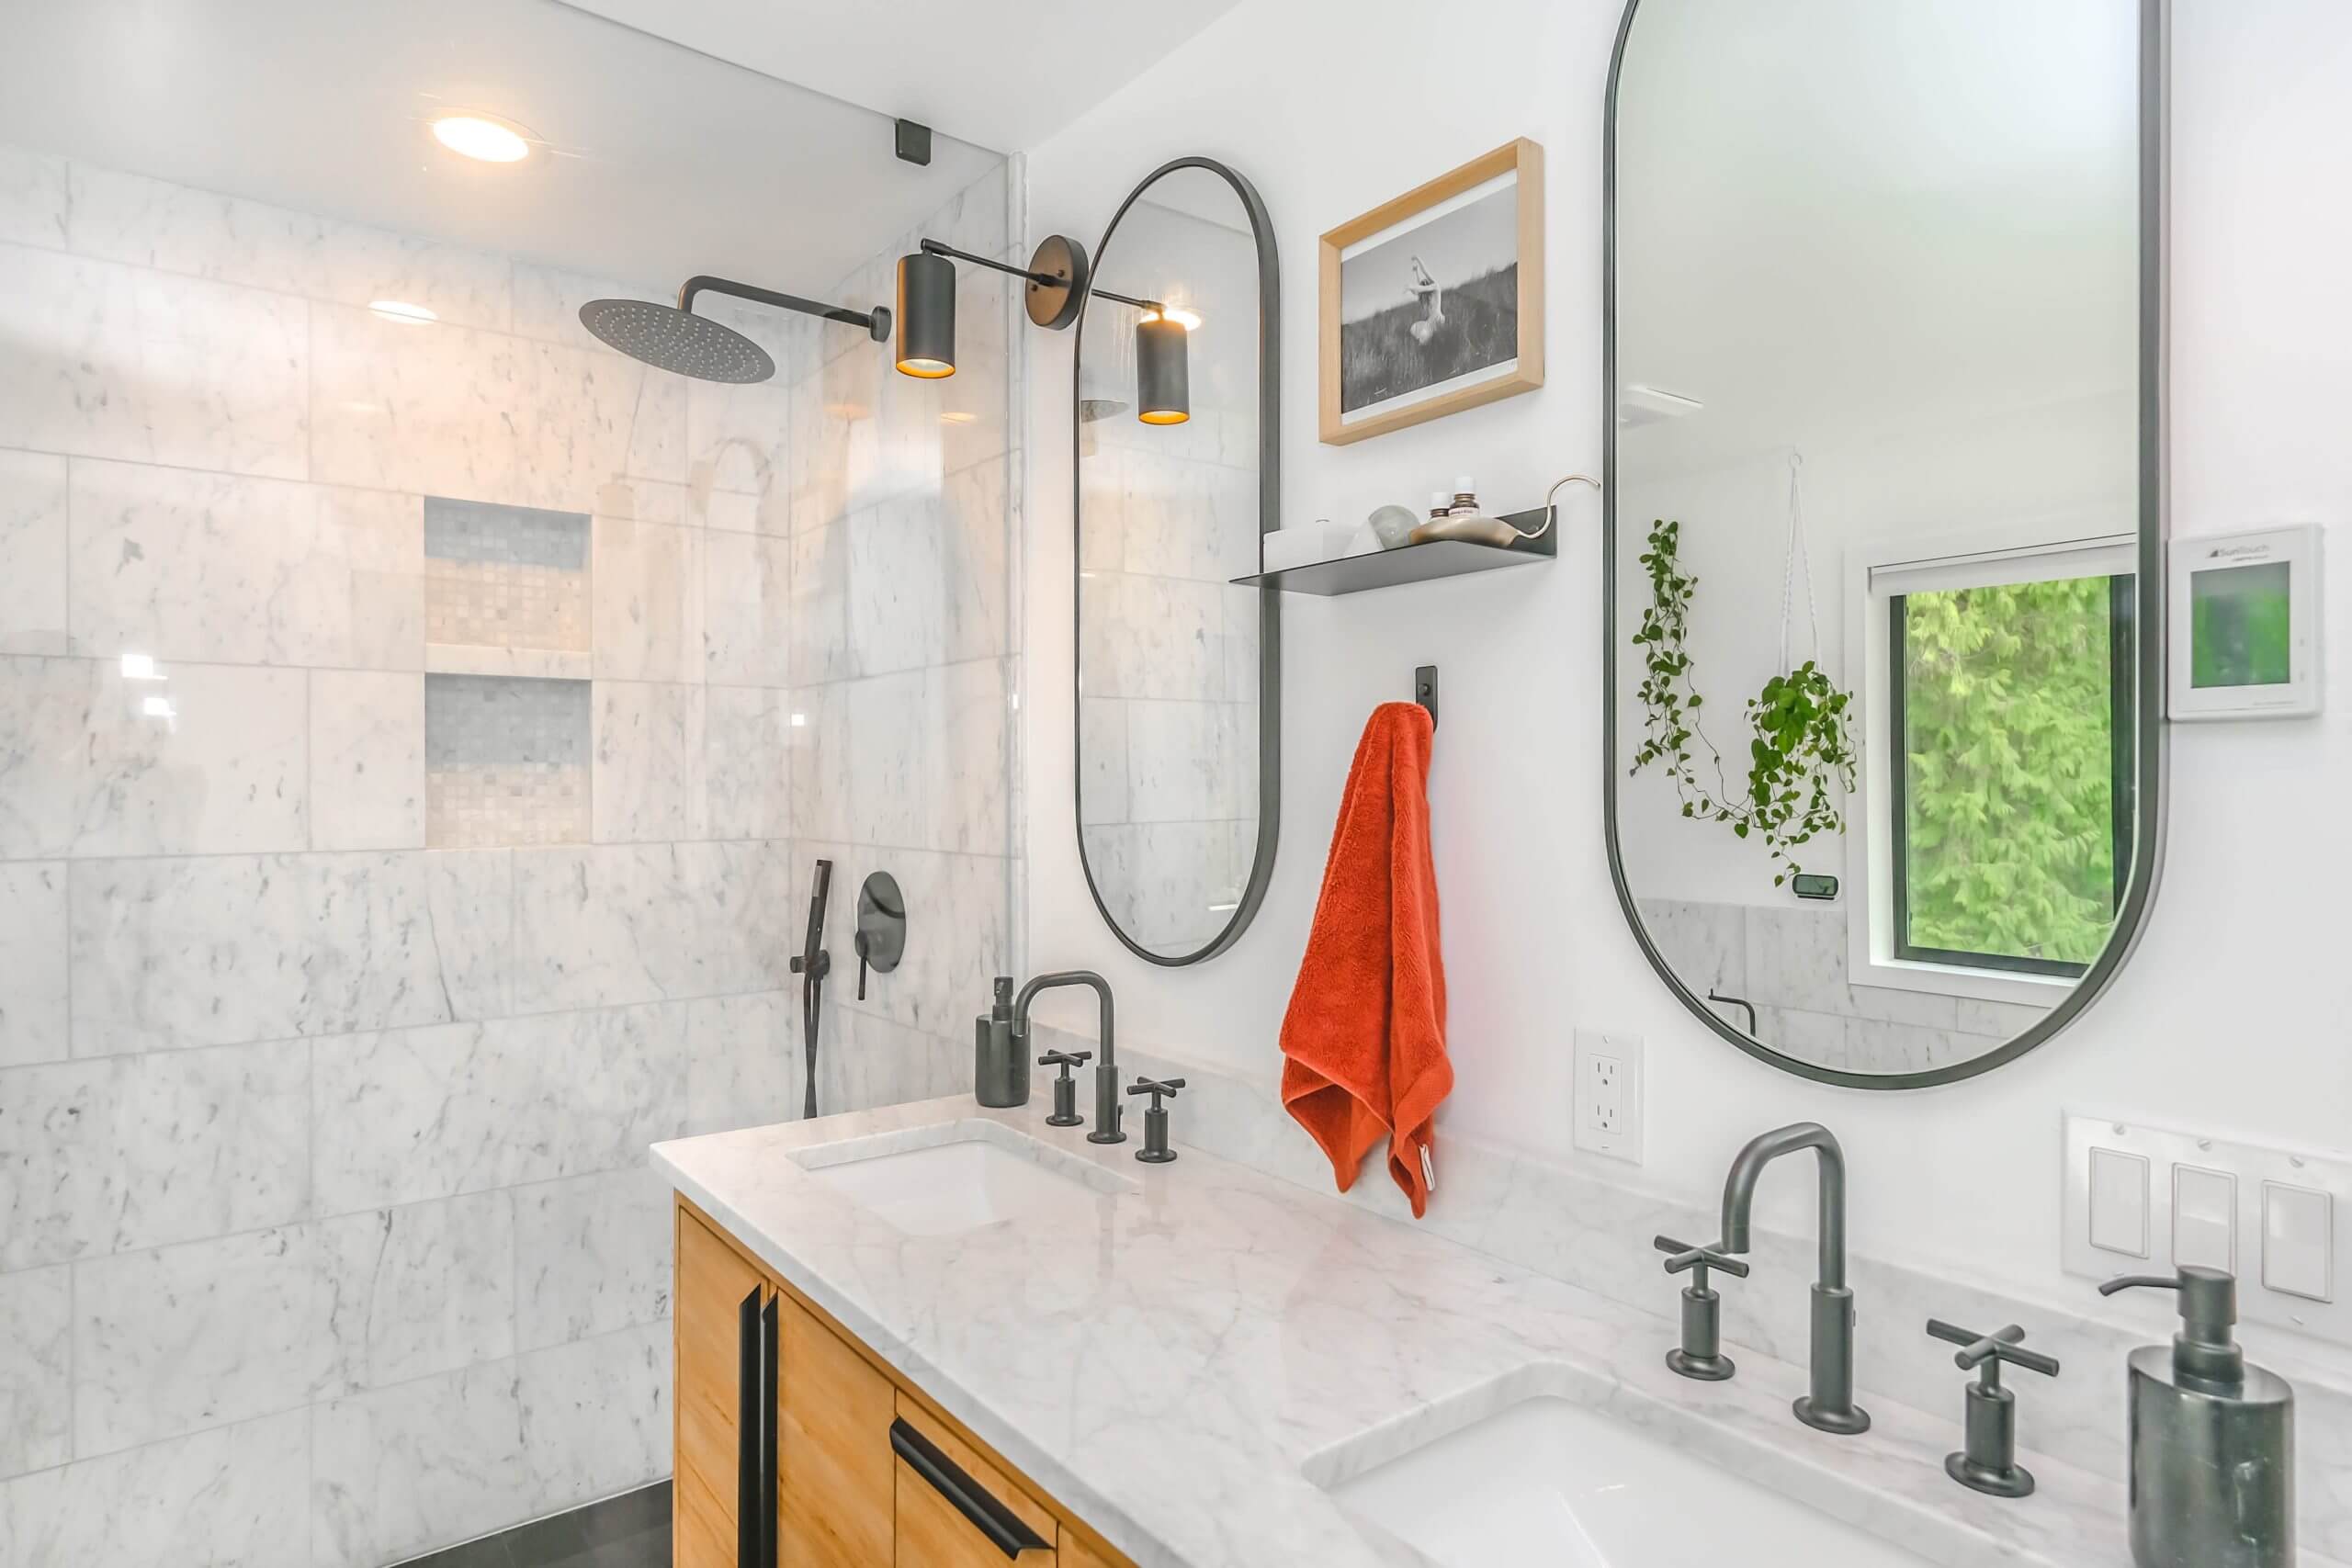 Installing a Shower Seat in Your Bathroom: A Complete Guide